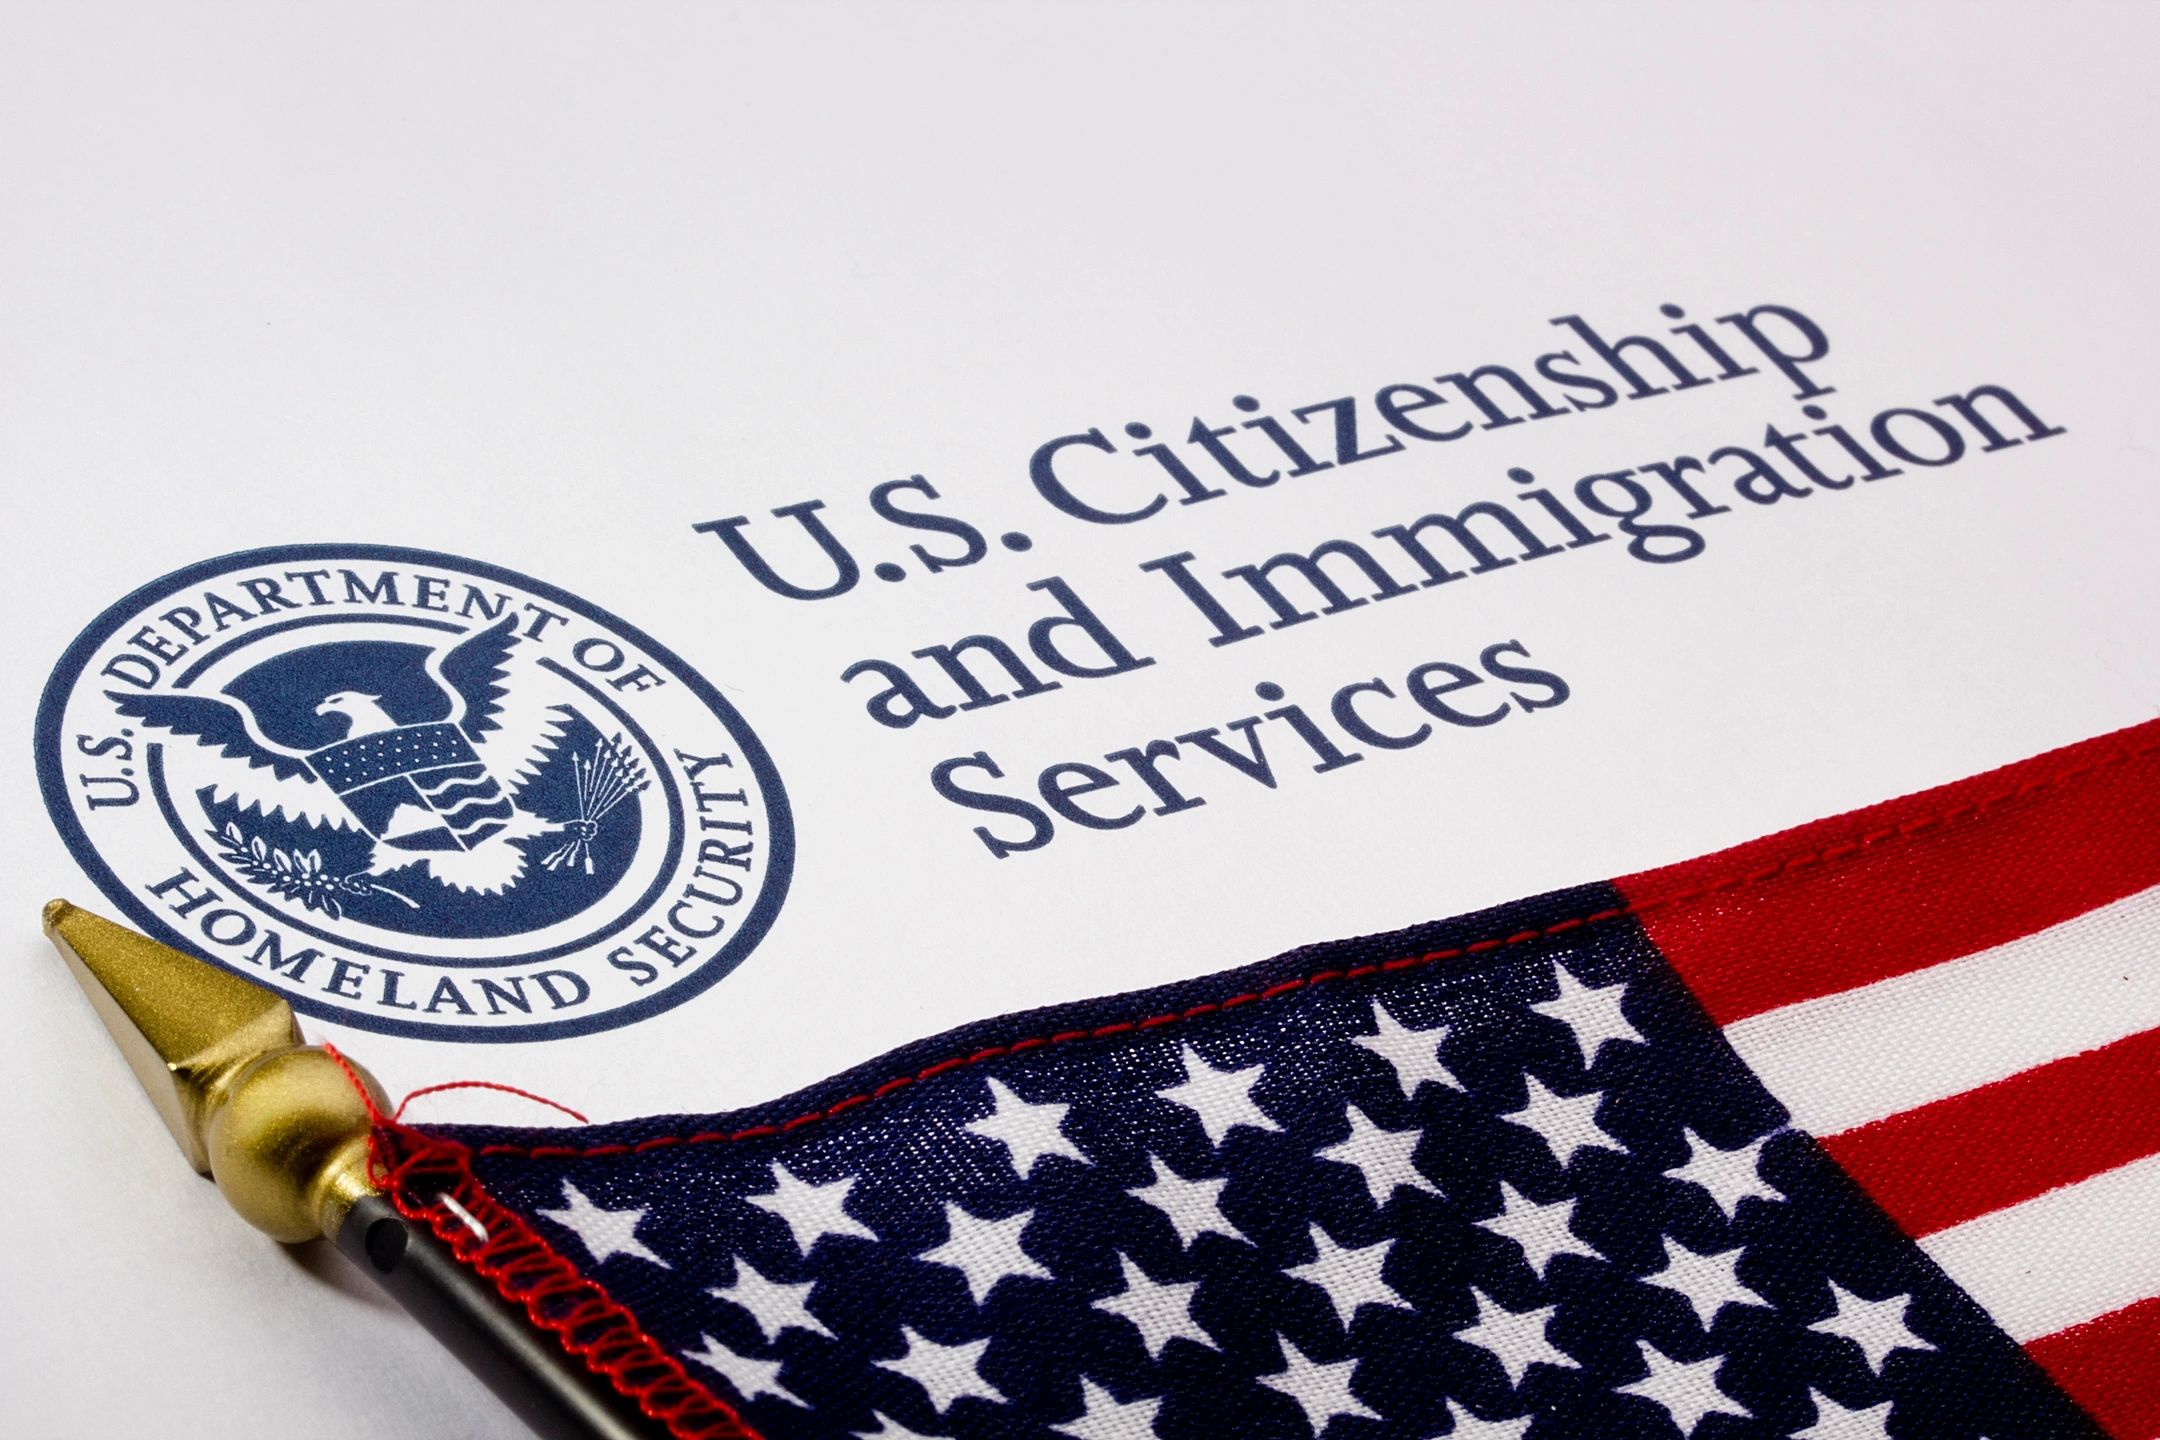 USCIS: US Citizenship and Immigration Services